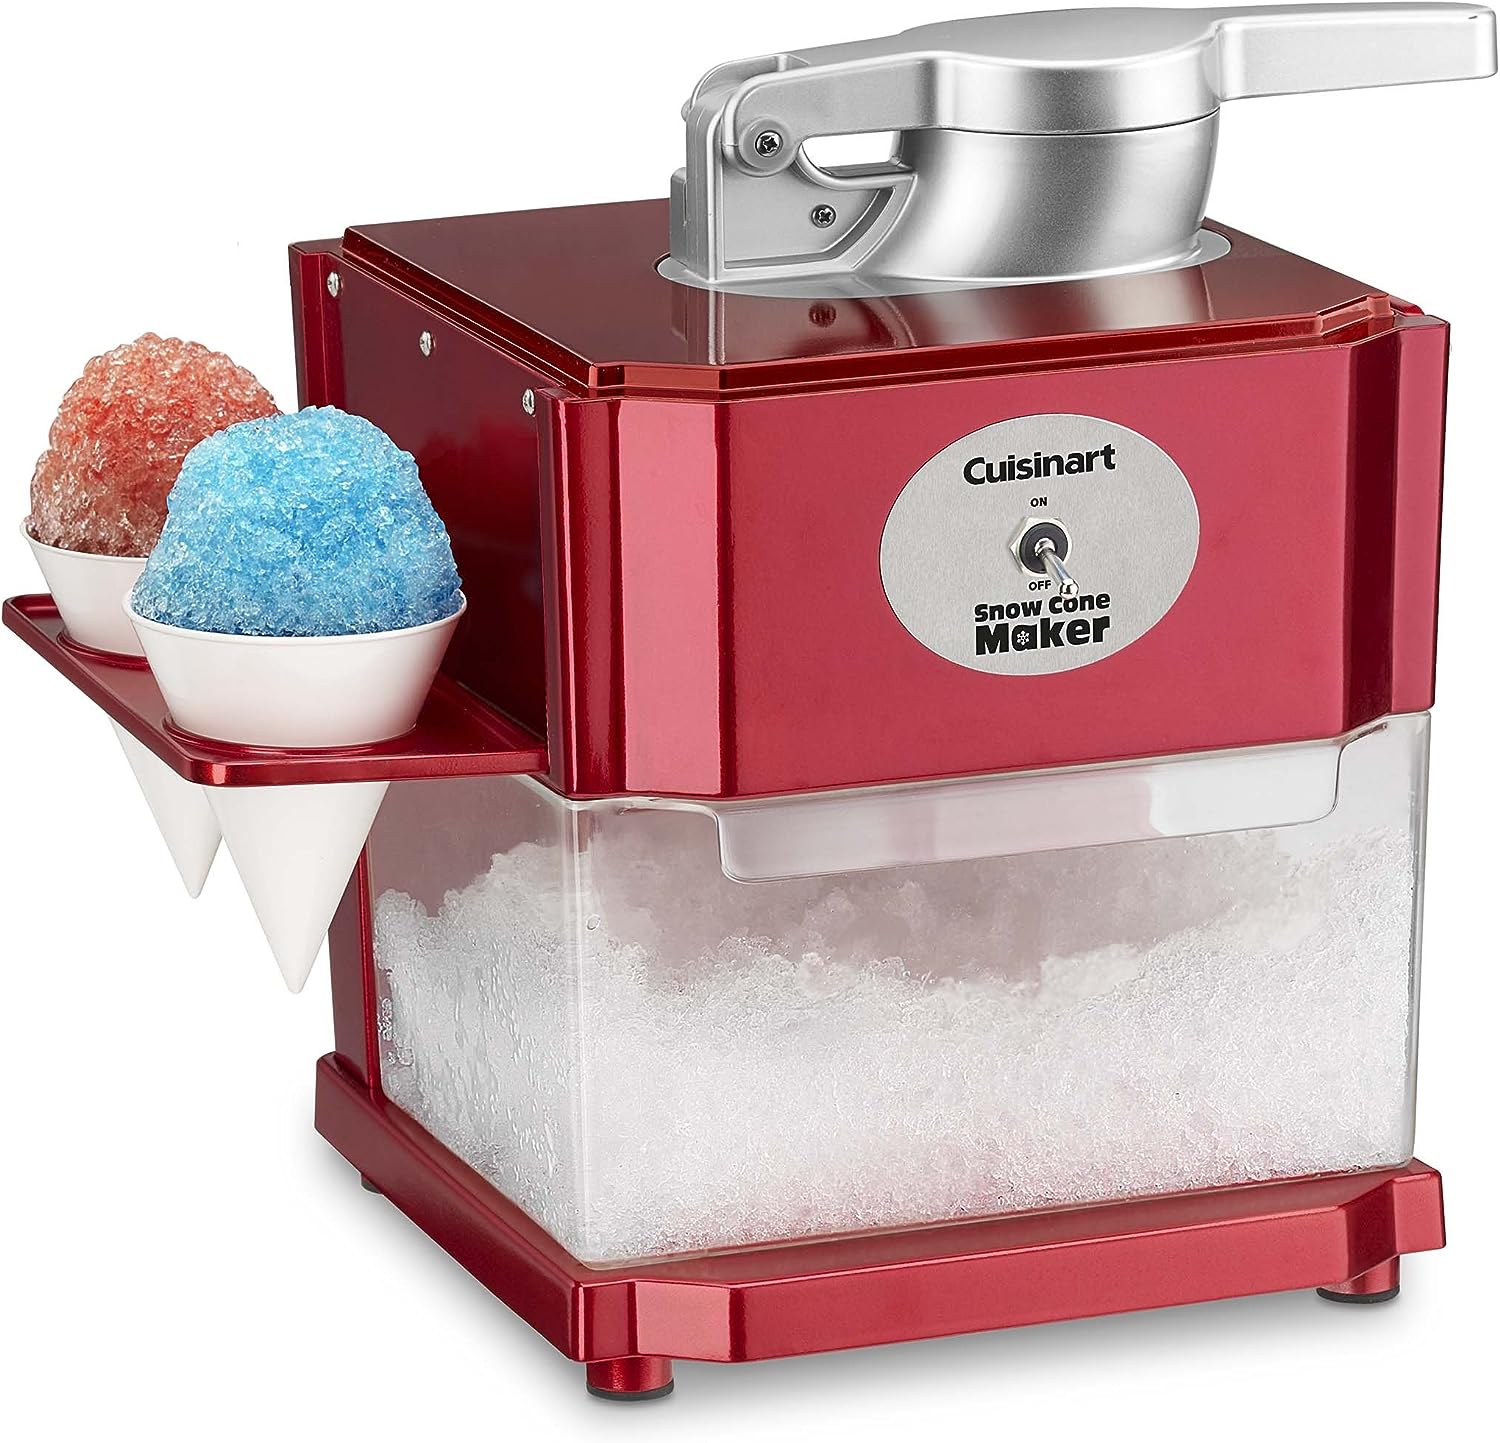 Waring Pro SCM100 Professional Snow Cone Cuisinart One Size Red